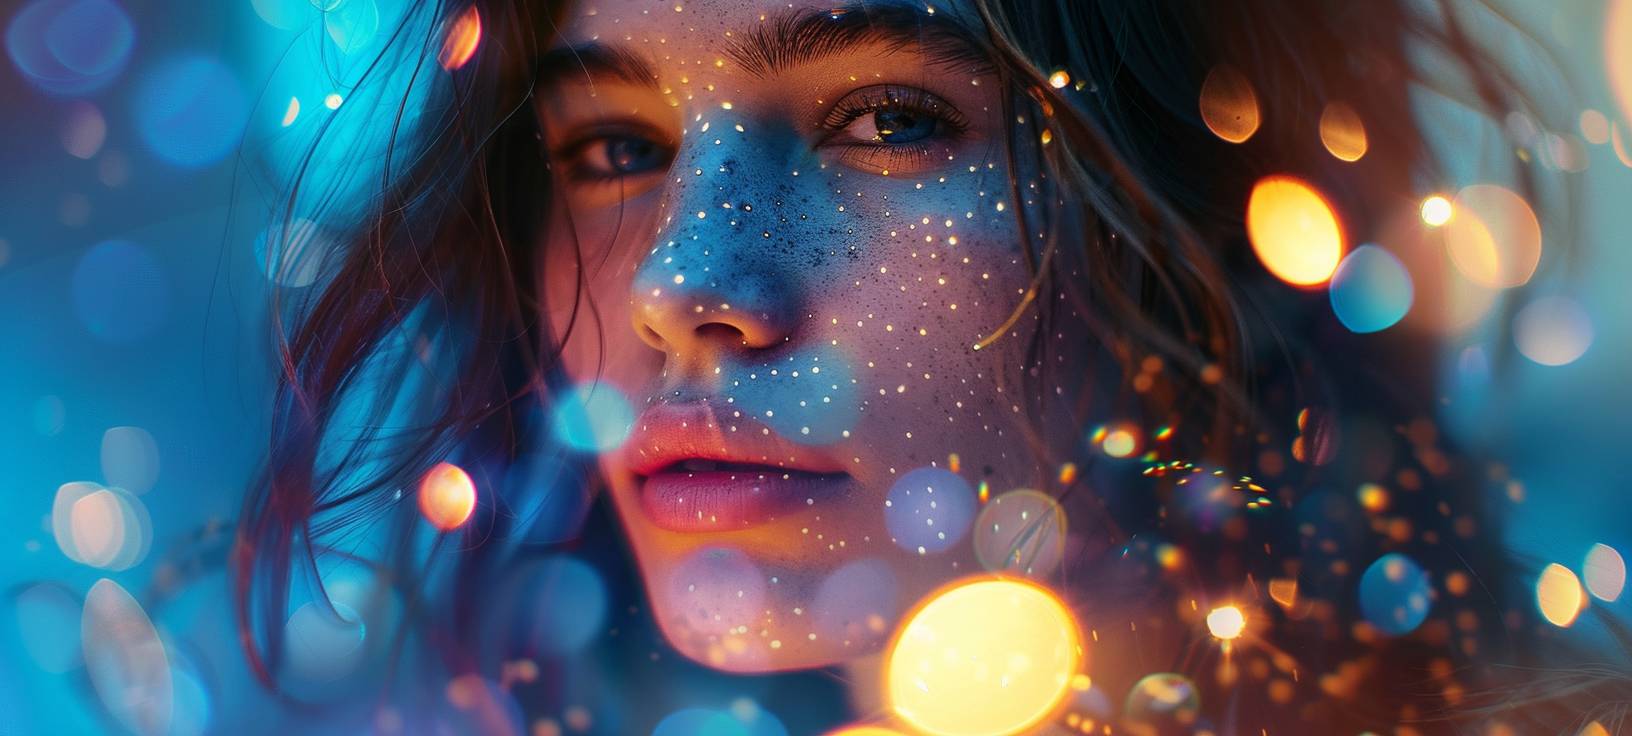 Portrait of a young woman with dark hair and a face illuminated by sparkling lights, set against a holographic, shimmering, glittery rainbowcore background, captured with double exposure photography to create a psychedelic, cinematic beauty